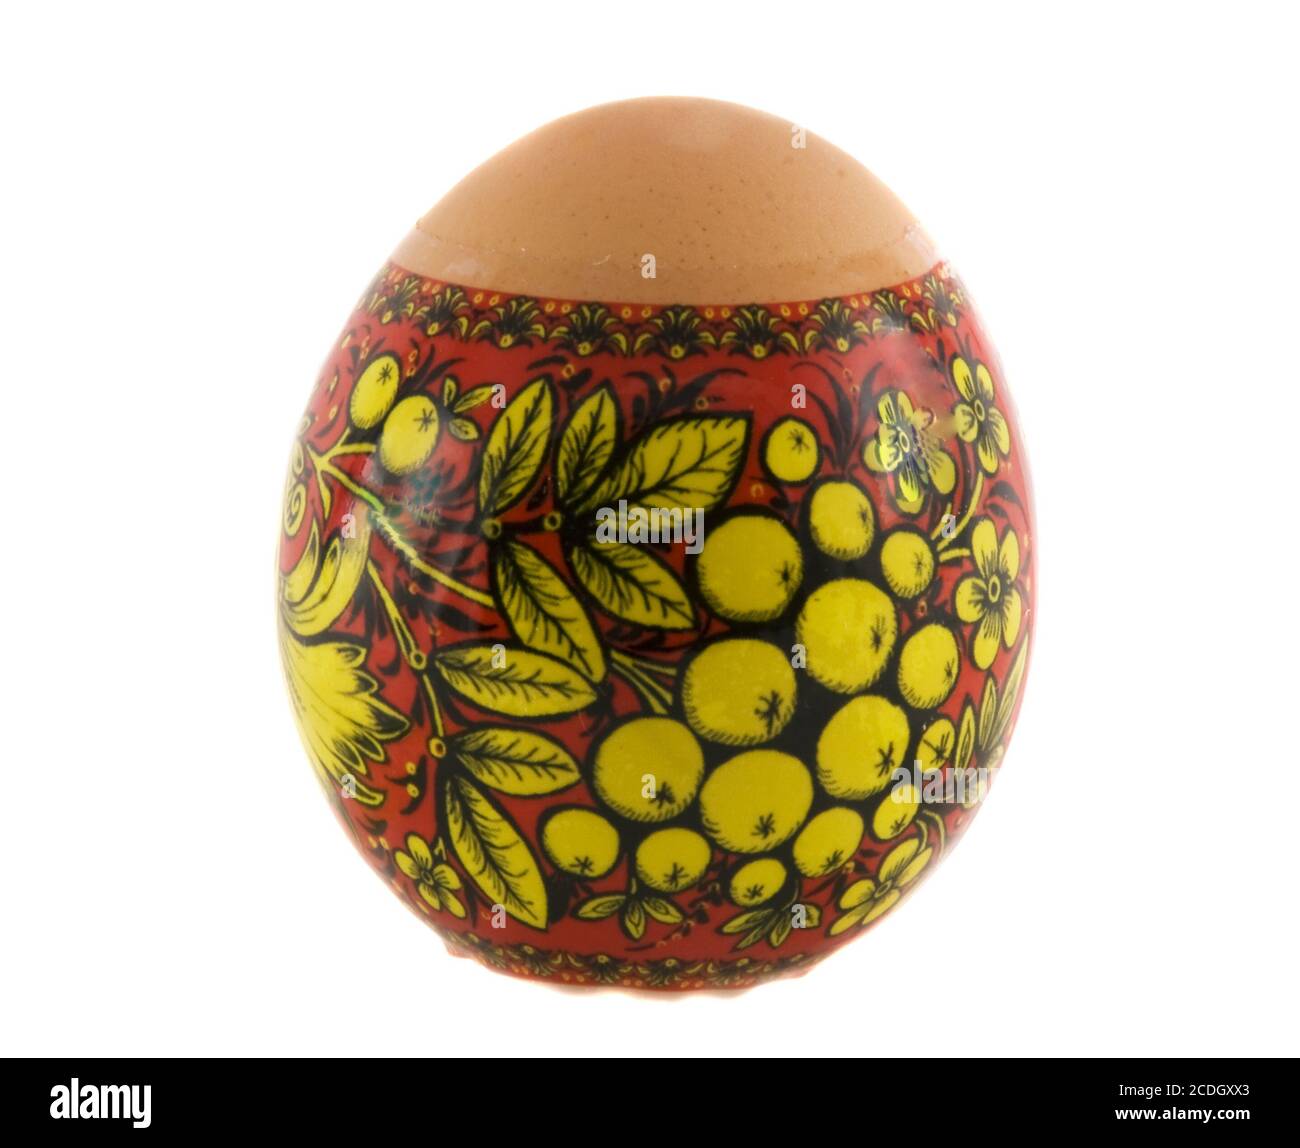 Russian Easter Egg High Resolution Stock Photography and Images 